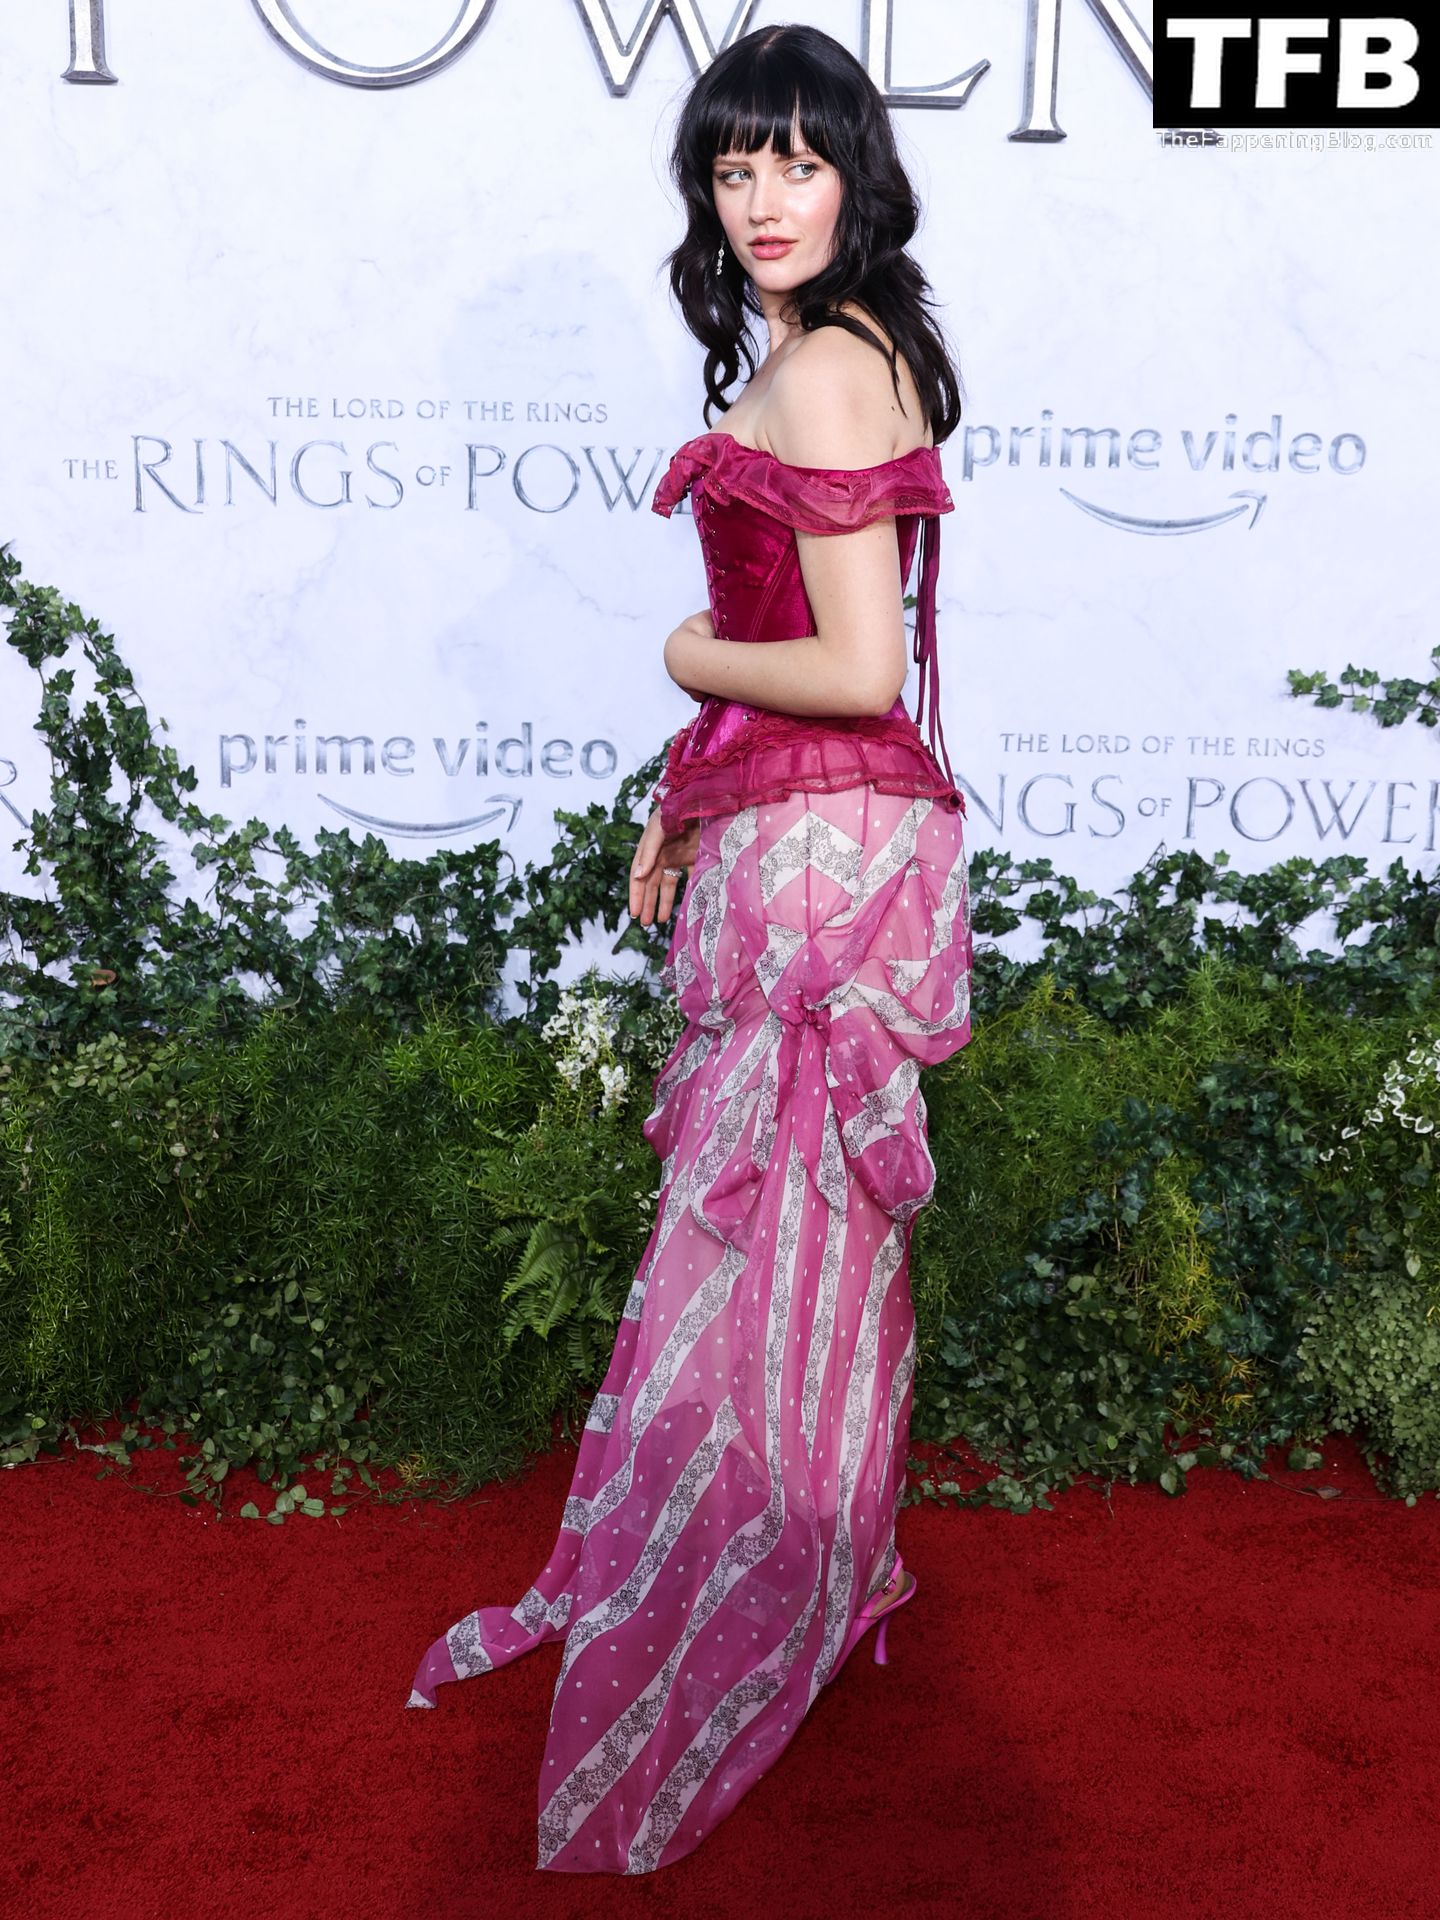 Markella Kavenagh Flaunts Her Cleavage at the Premiere of “The Lord of the Rings: The Rings of Power” in LA (40 Photos)